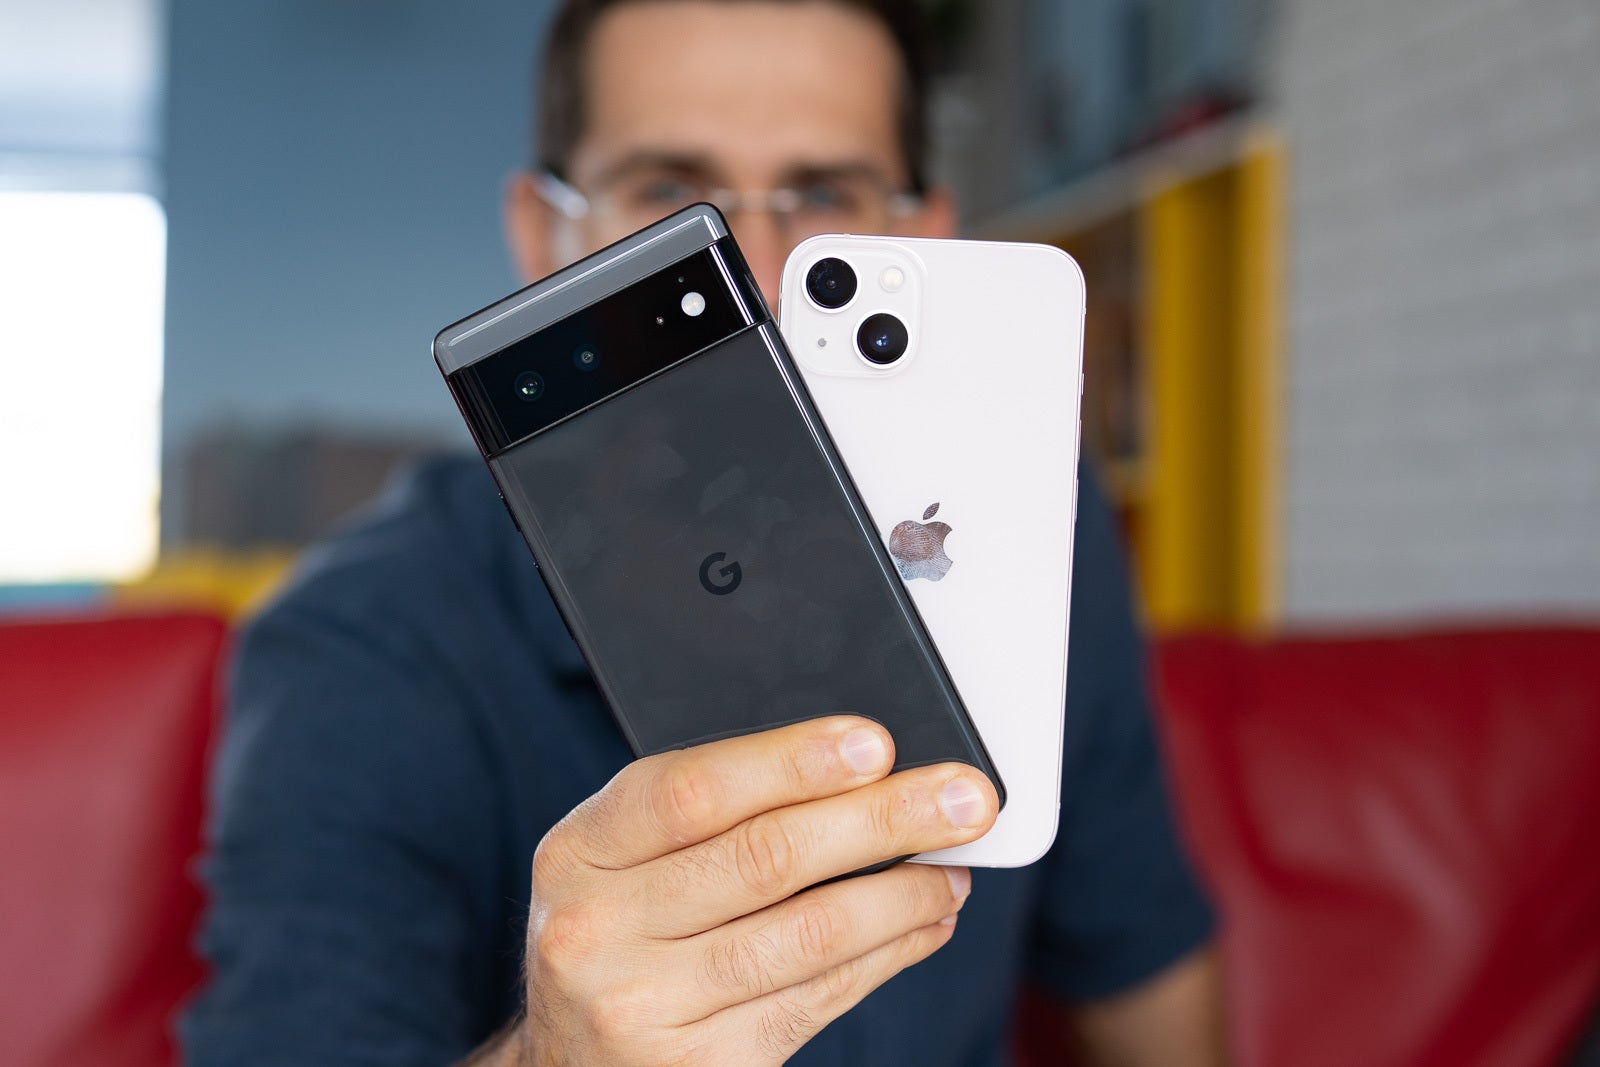 The Pixel 6 is the first phone with a Google-made chip called Tensor - Google Pixel 6 vs Apple iPhone 13